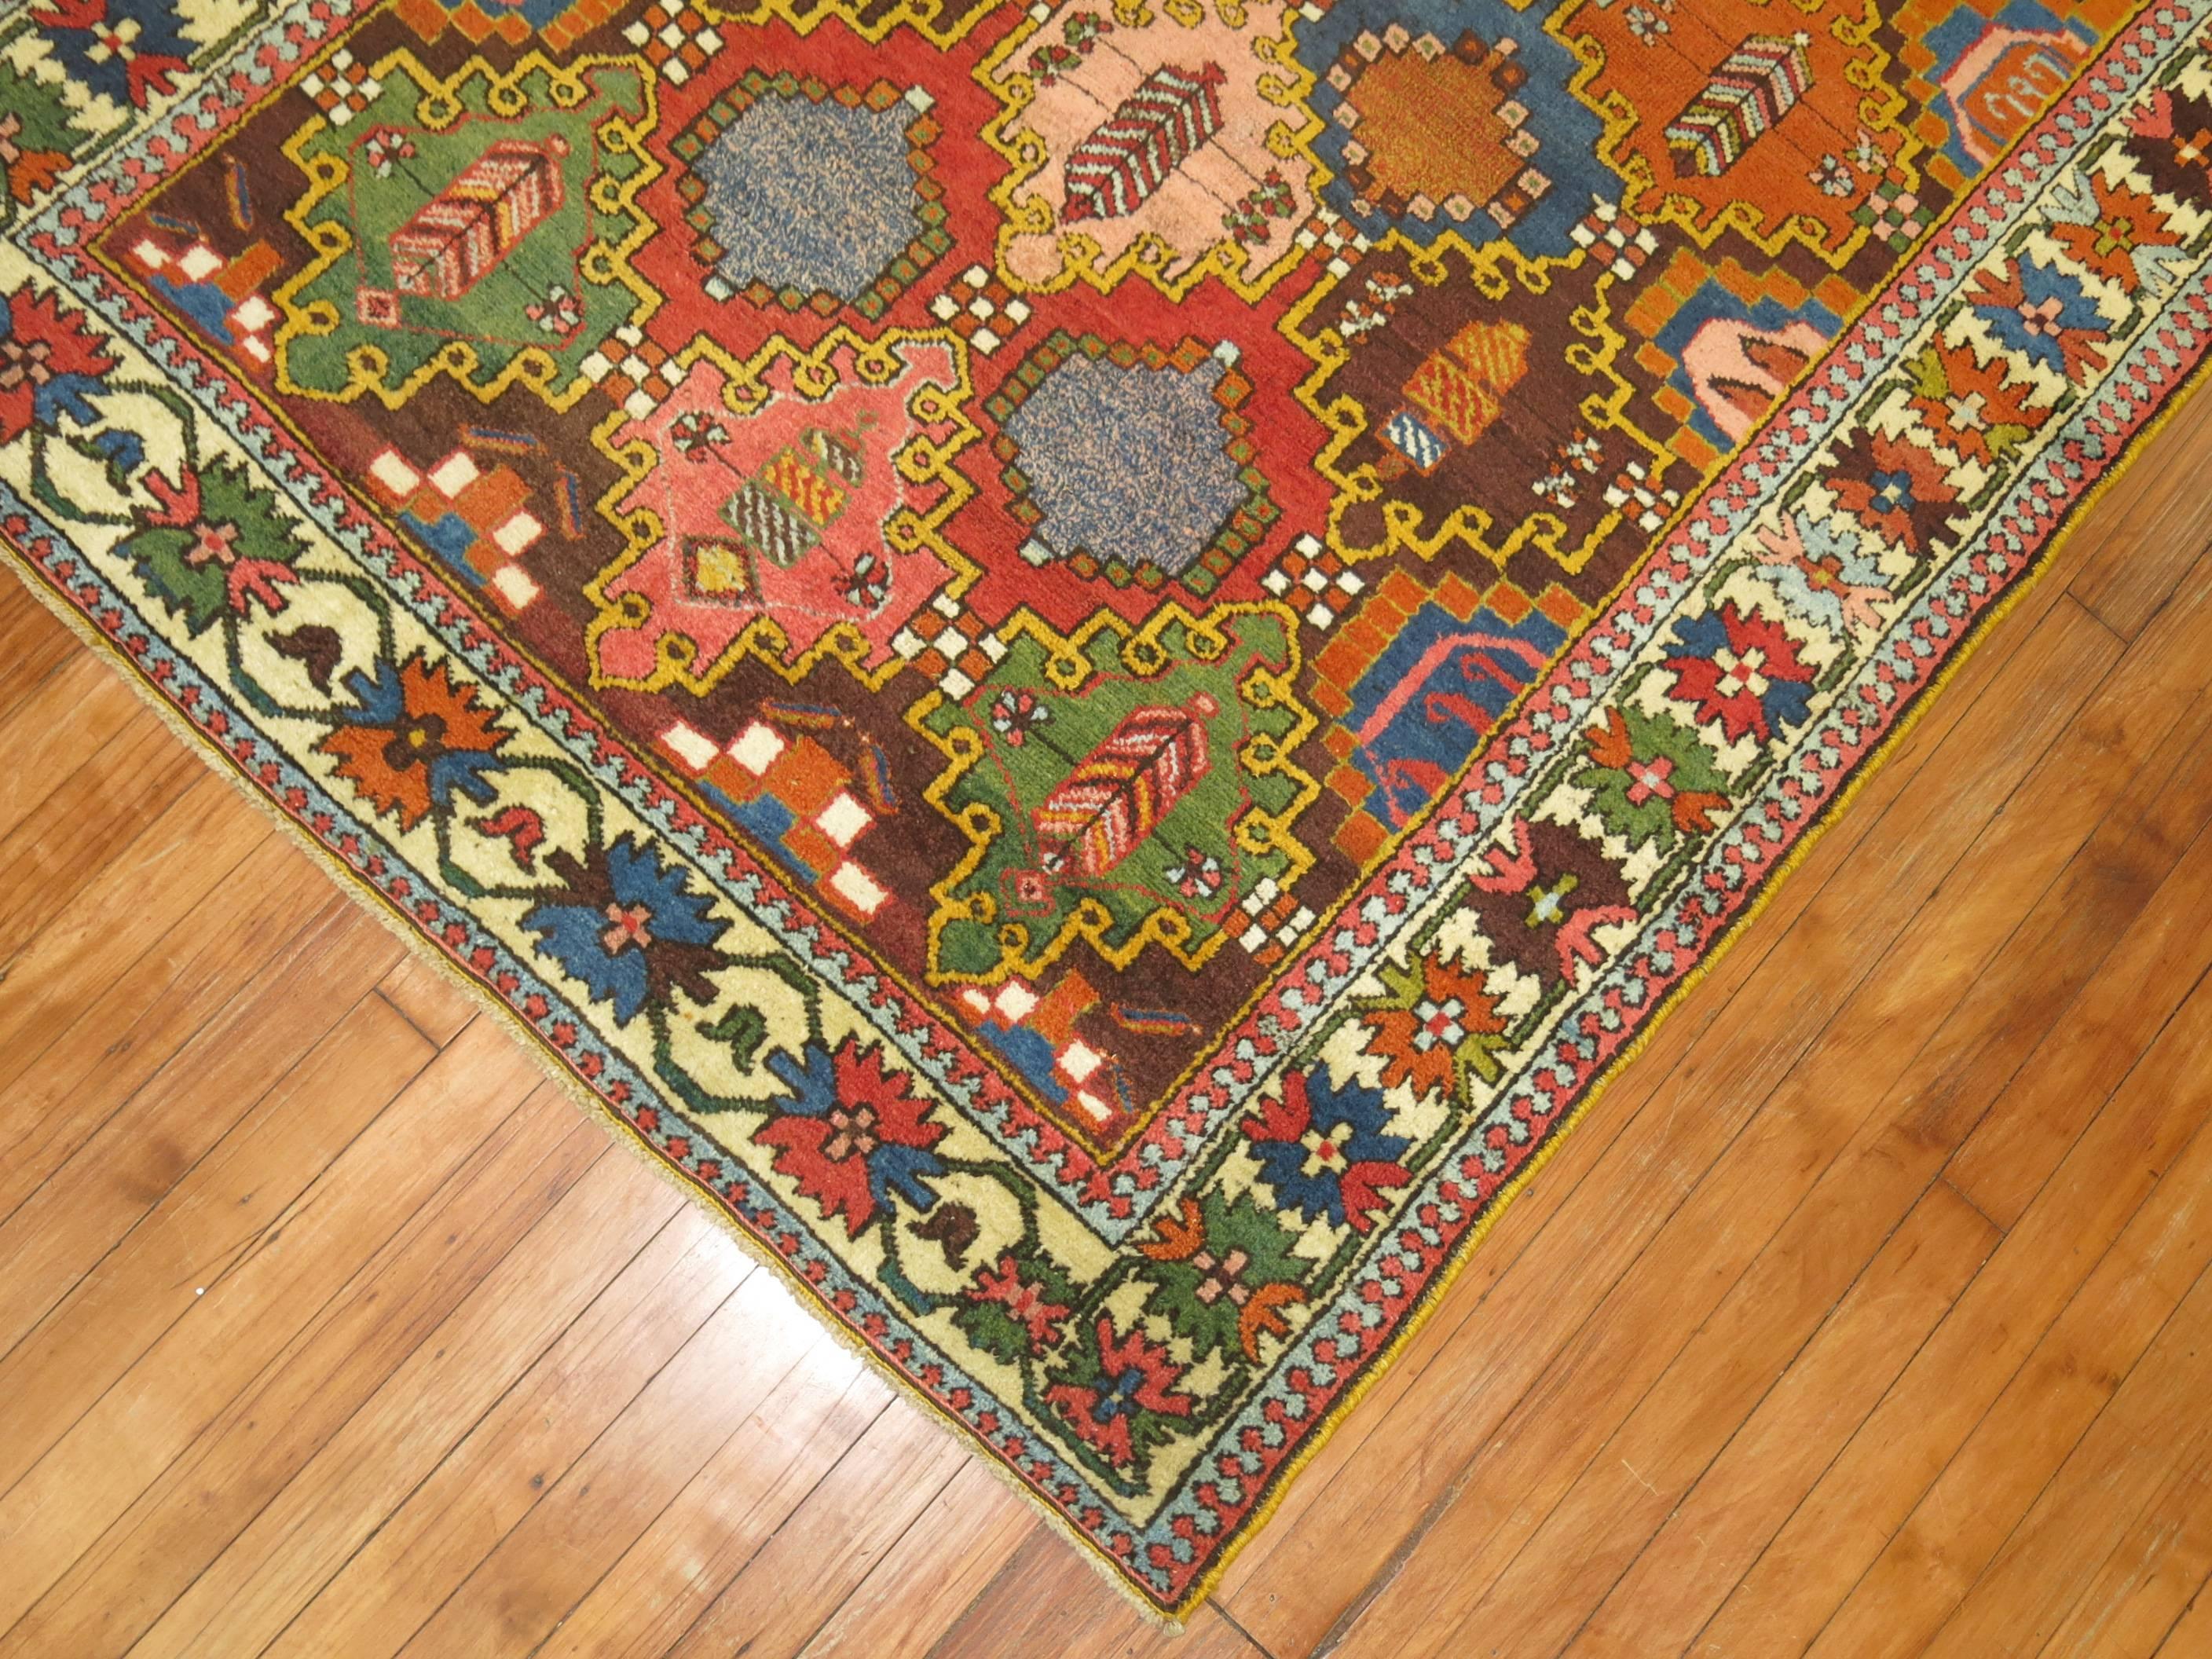 An early 20th century colorful Persian Bakhtiari rug featuring colorful accents predominantly in blue, green and pink.